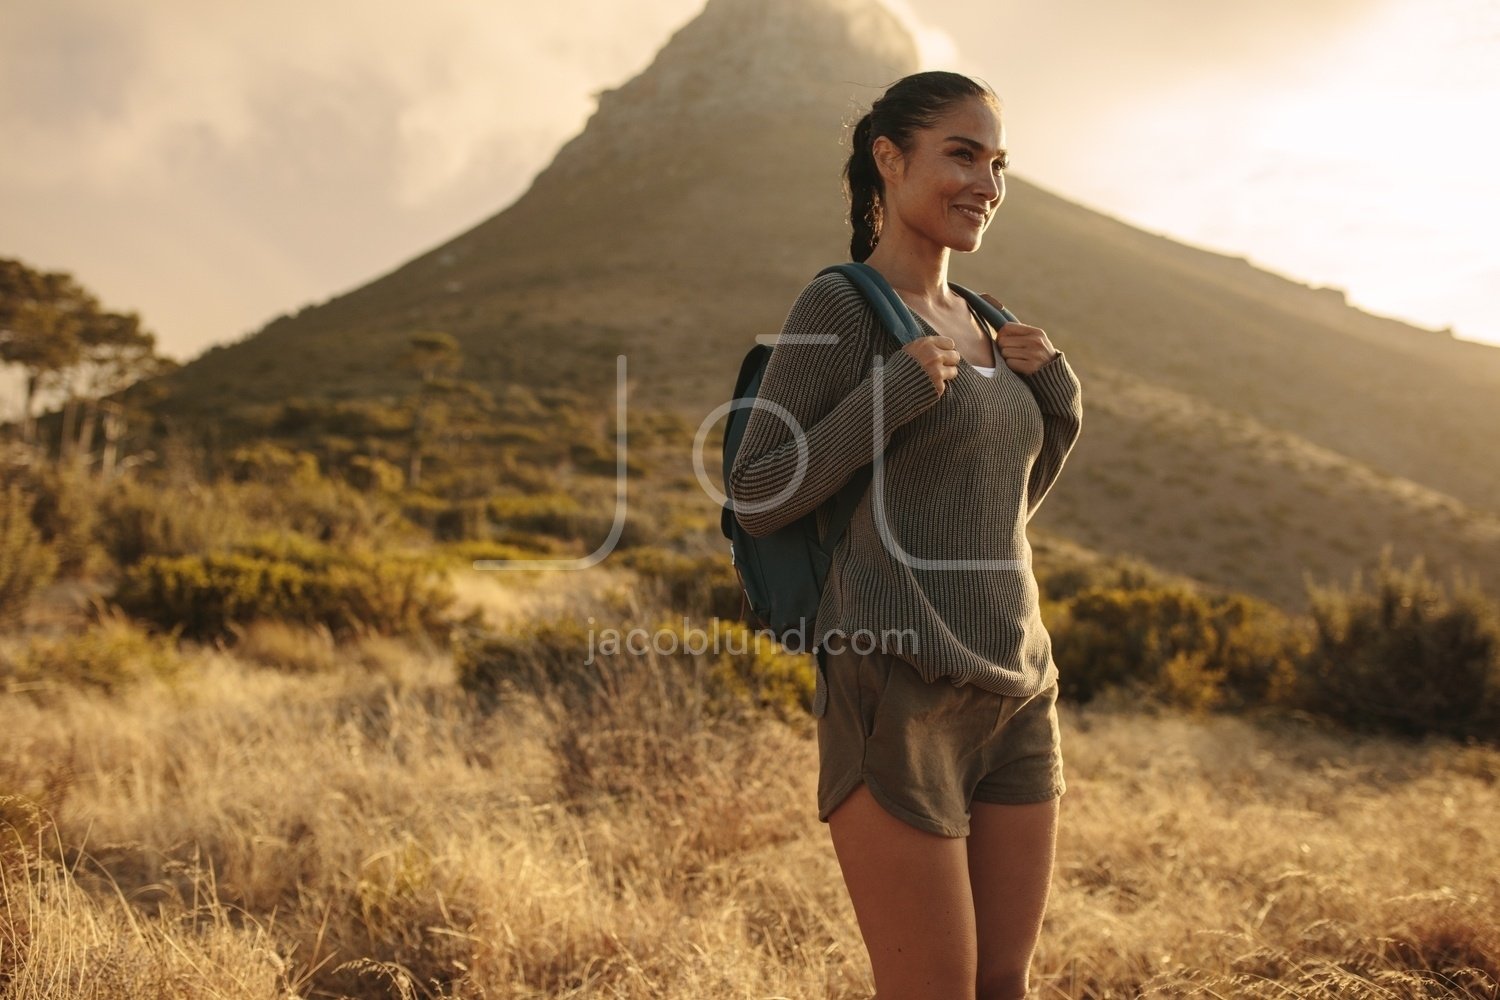 Woman Hiking In Mountains And Looking At The Scenic View